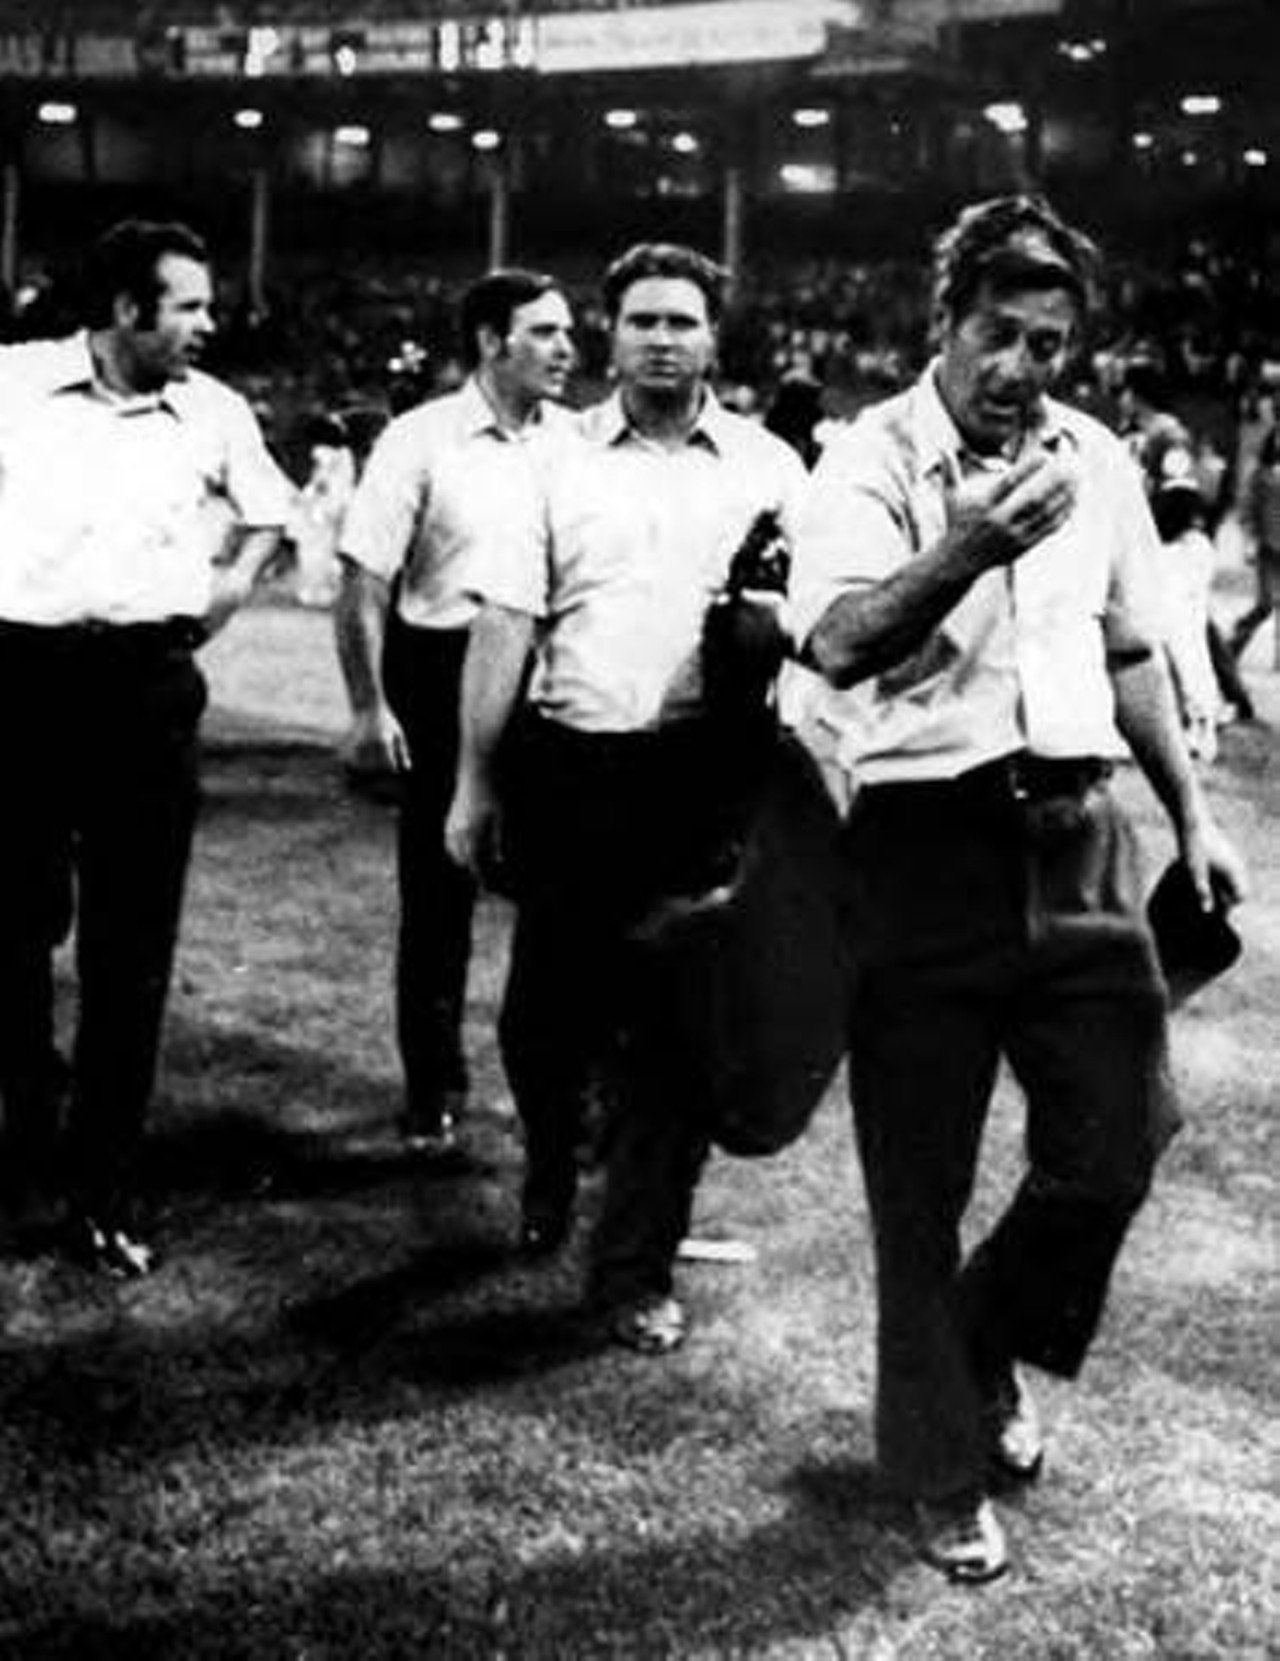 Crew chief Nestor Chylak leads his umpires off the field during the infamous Ten Cent Beer Night game at Cleveland Municipal Stadium. 1974